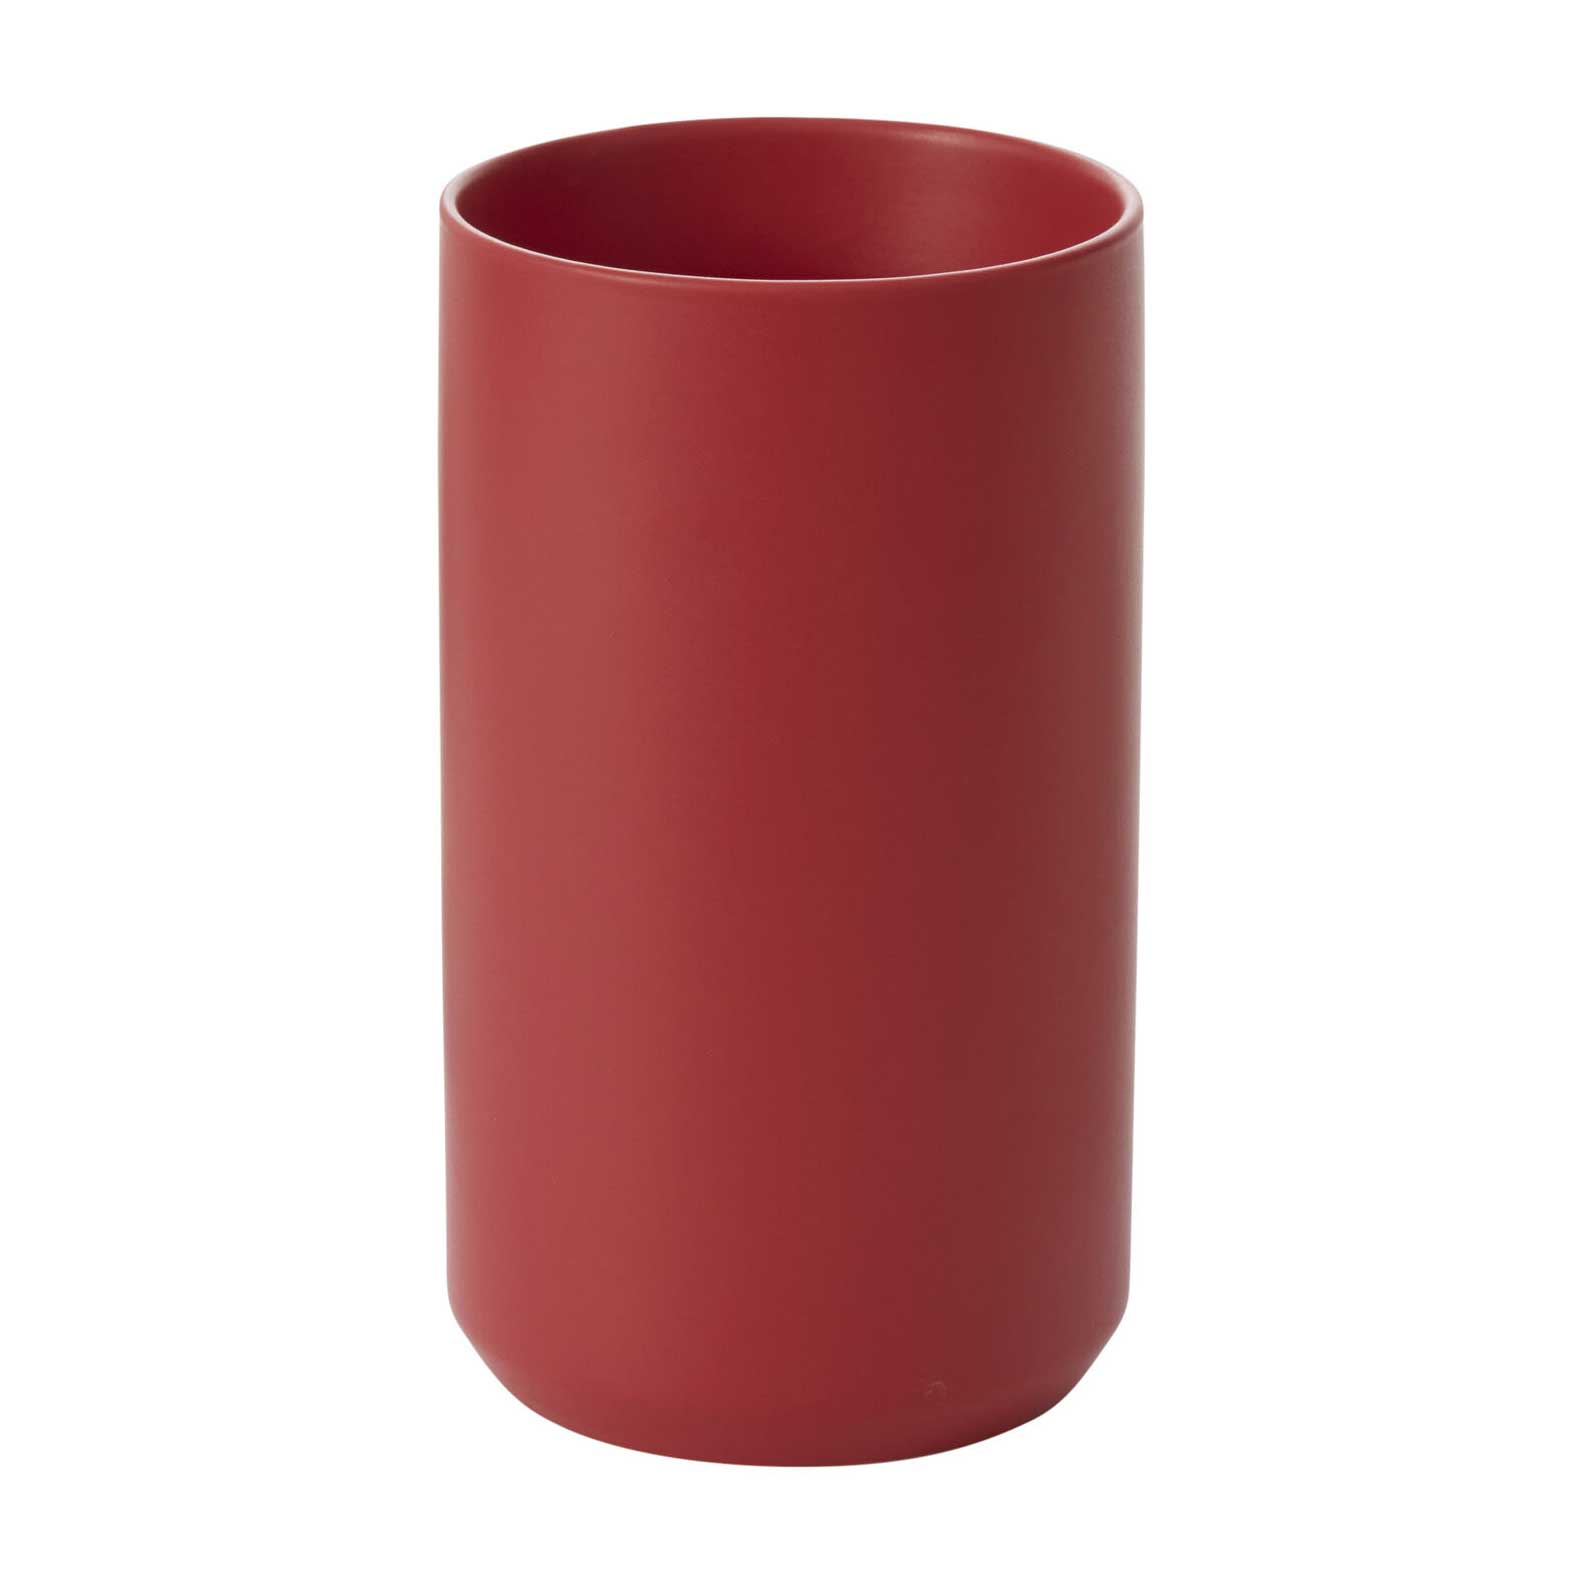 Accent_Decor_Red_Kendall_Vase_97525